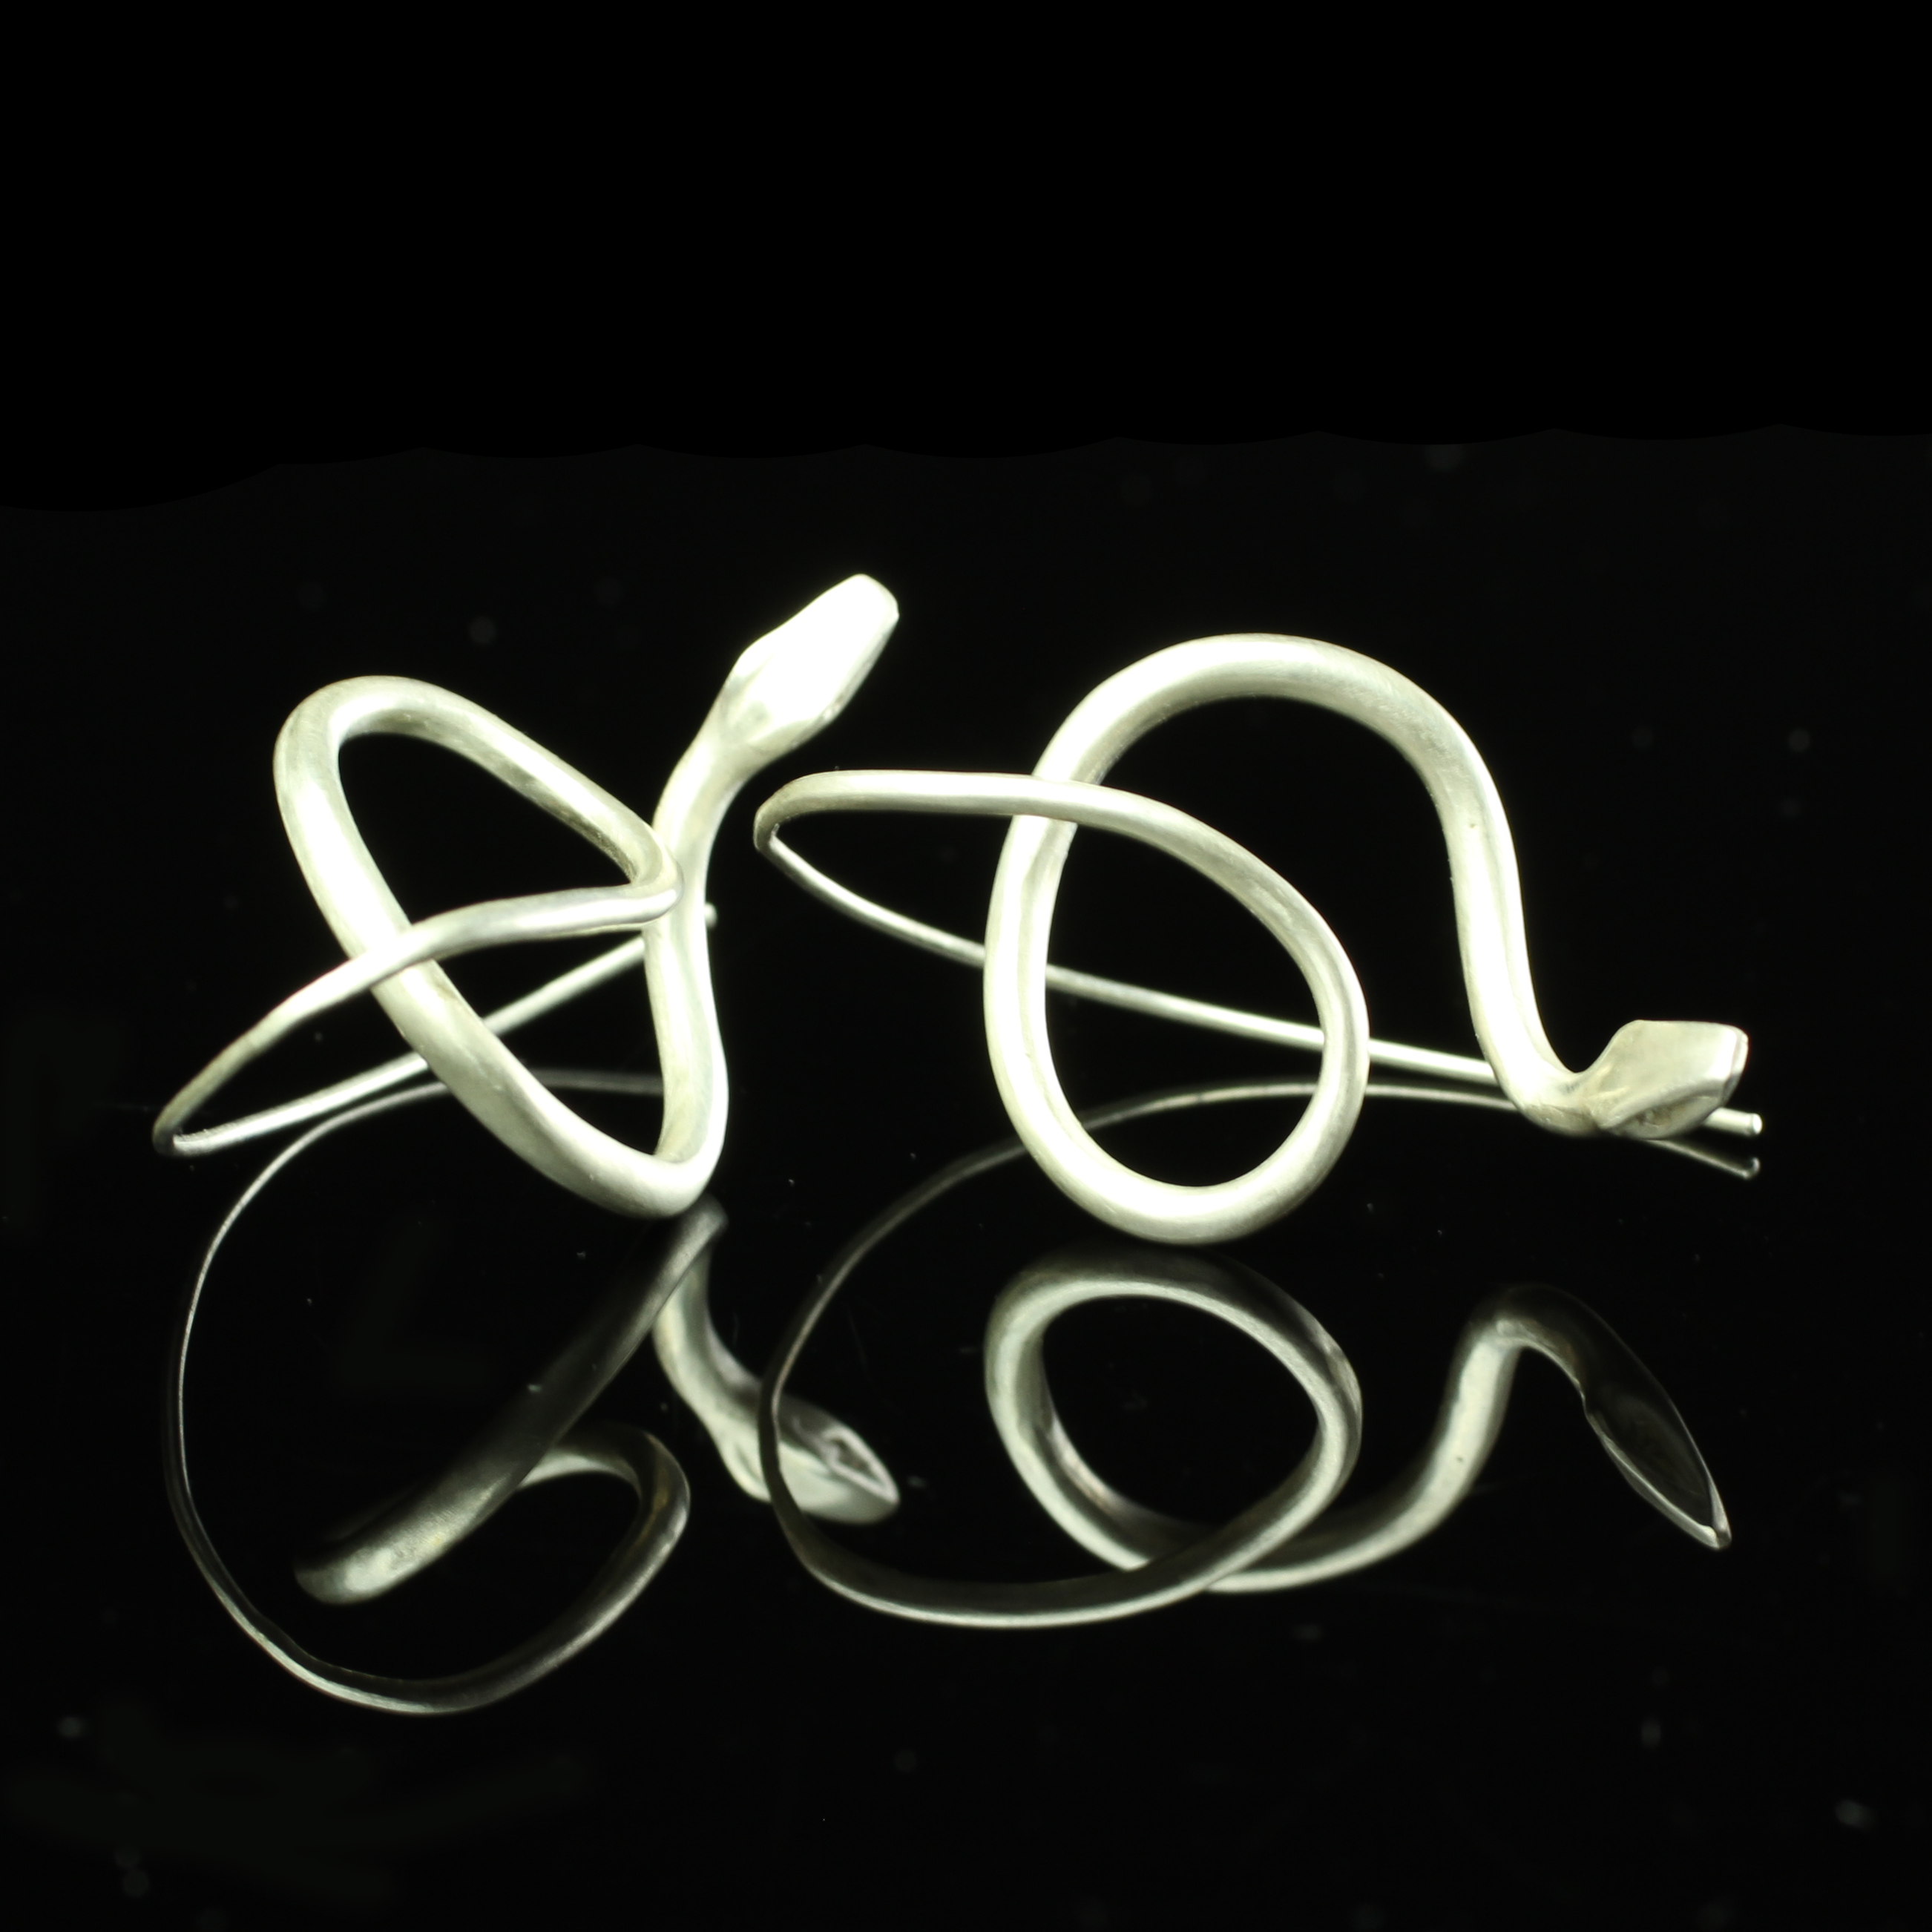 Sterling Silver Snake Earrings resting side by side with reflection below